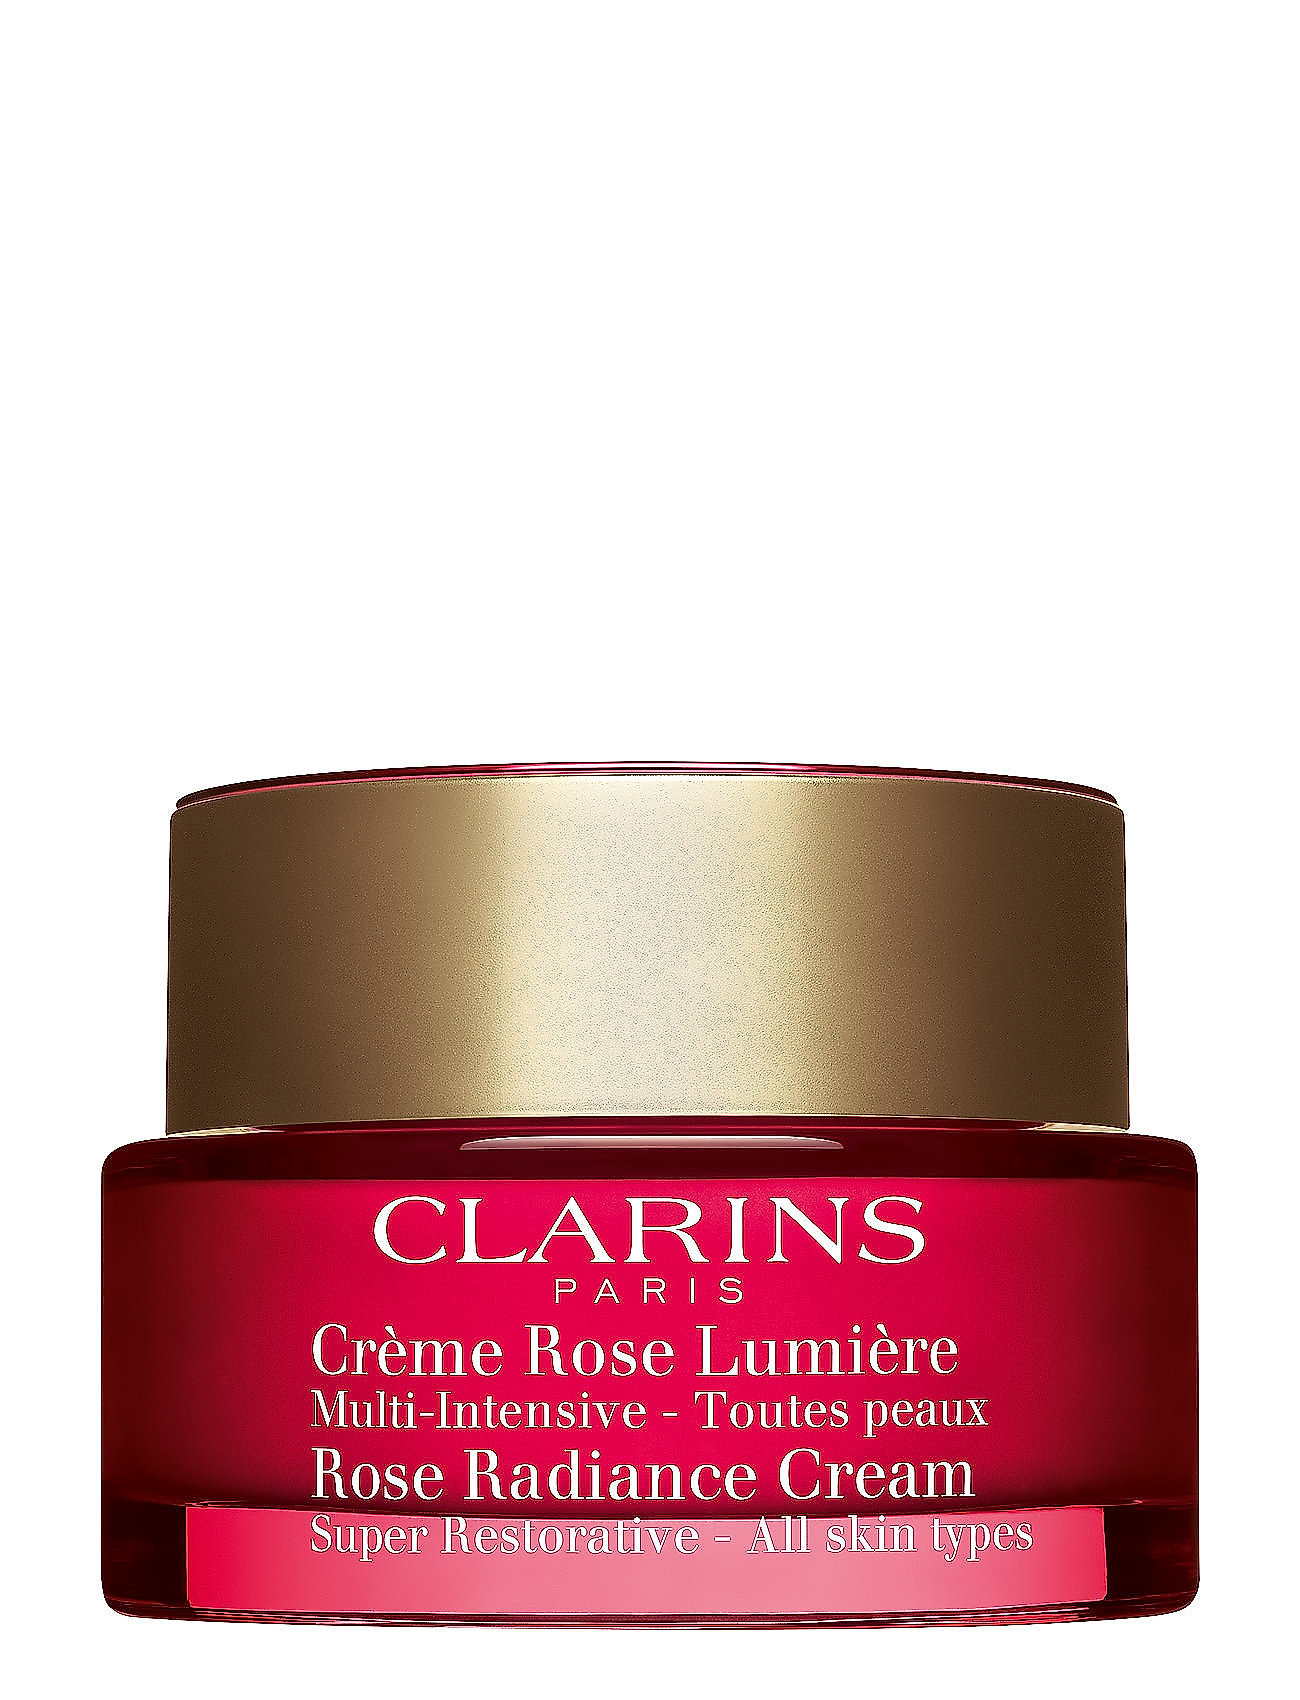 Super Restorative Rose Radiance Day Cream Beauty WOMEN Skin Care Face Day Creams Clarins